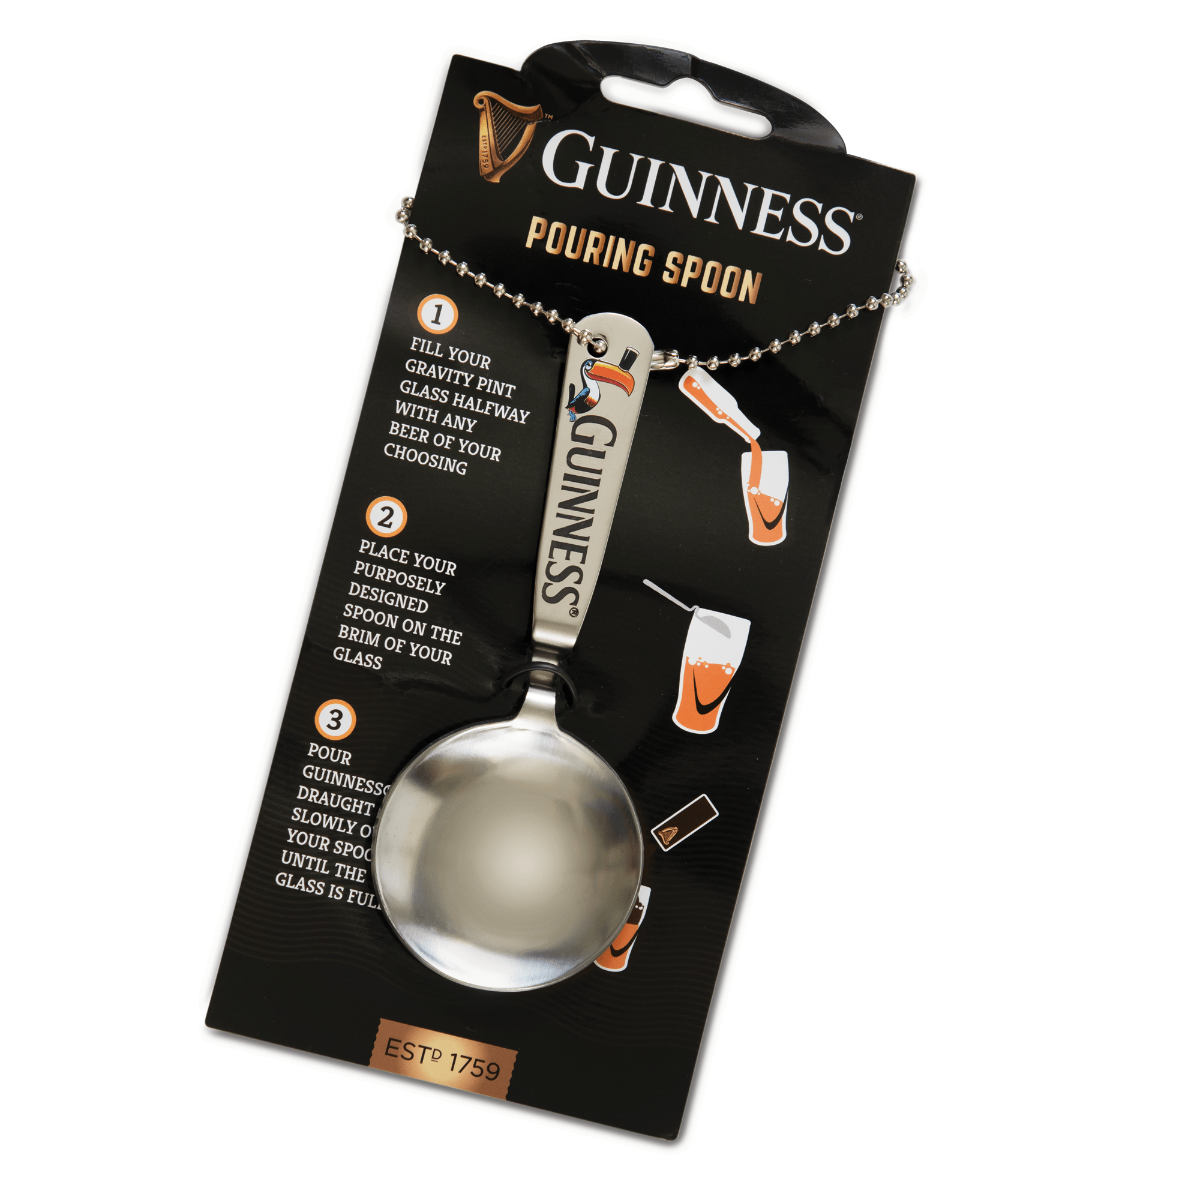 Guinness Ultimate Toucan Home Bar Pack in merchandise packaging, perfect for bar gift.